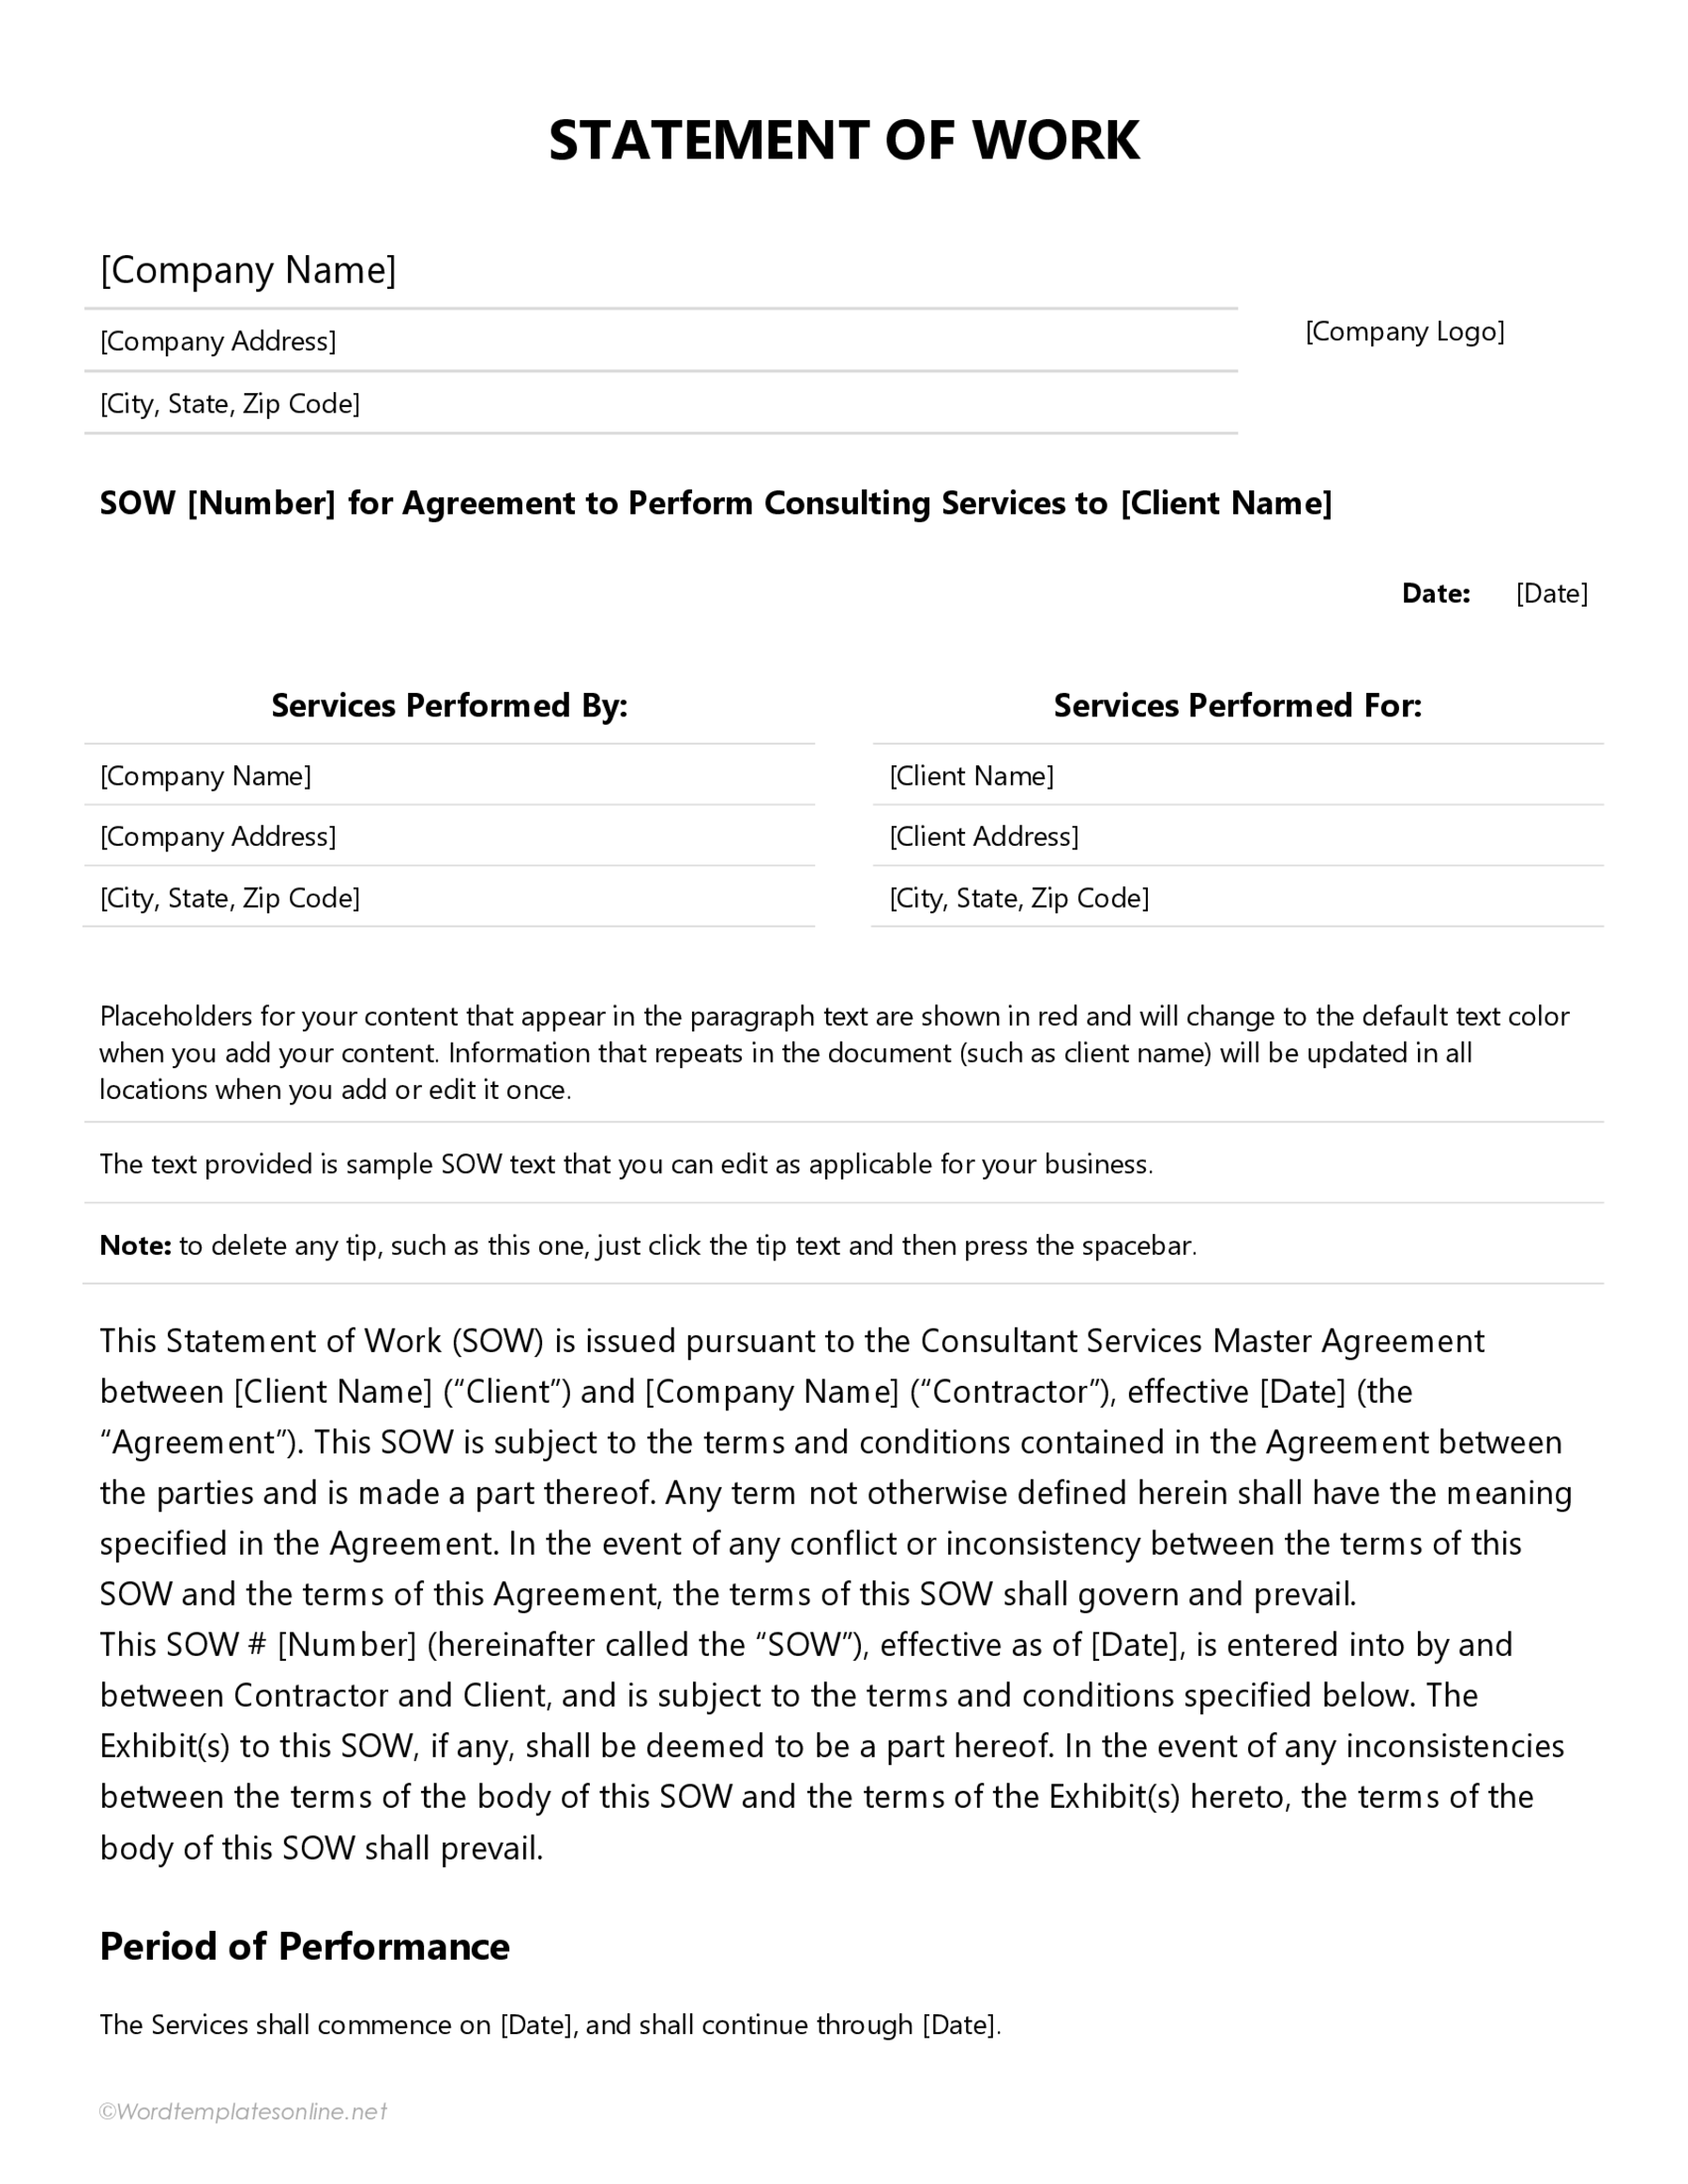 Free Statement of Work Template